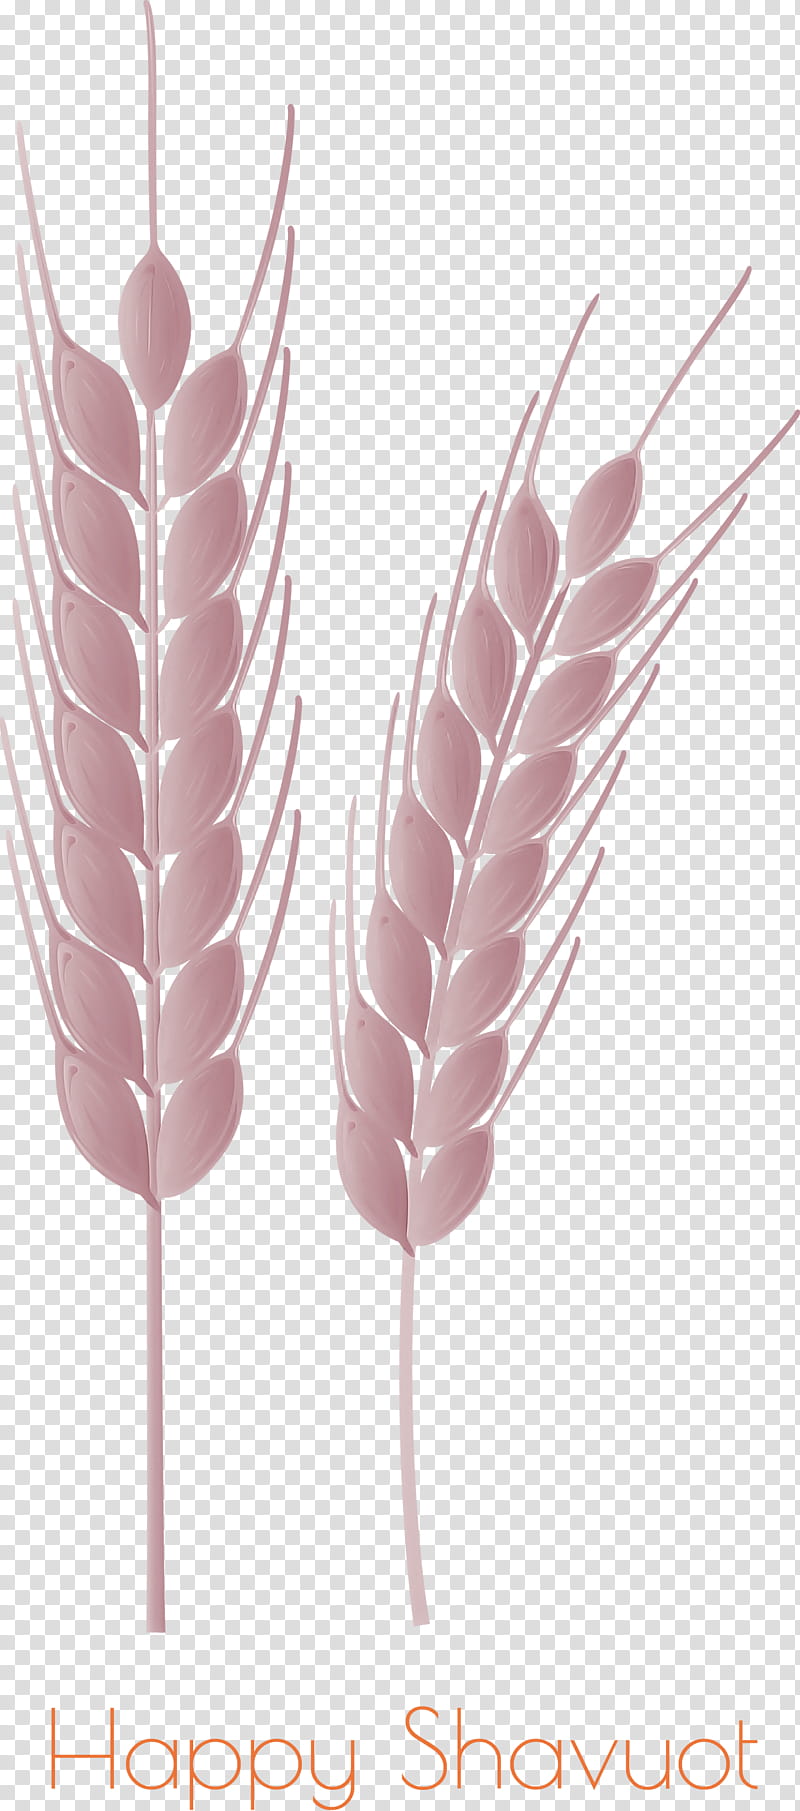 Happy Shavuot Shavuot Shovuos, Feather, Pink, Grass Family, Stick Candy, Plant, Food Grain, Wheat transparent background PNG clipart